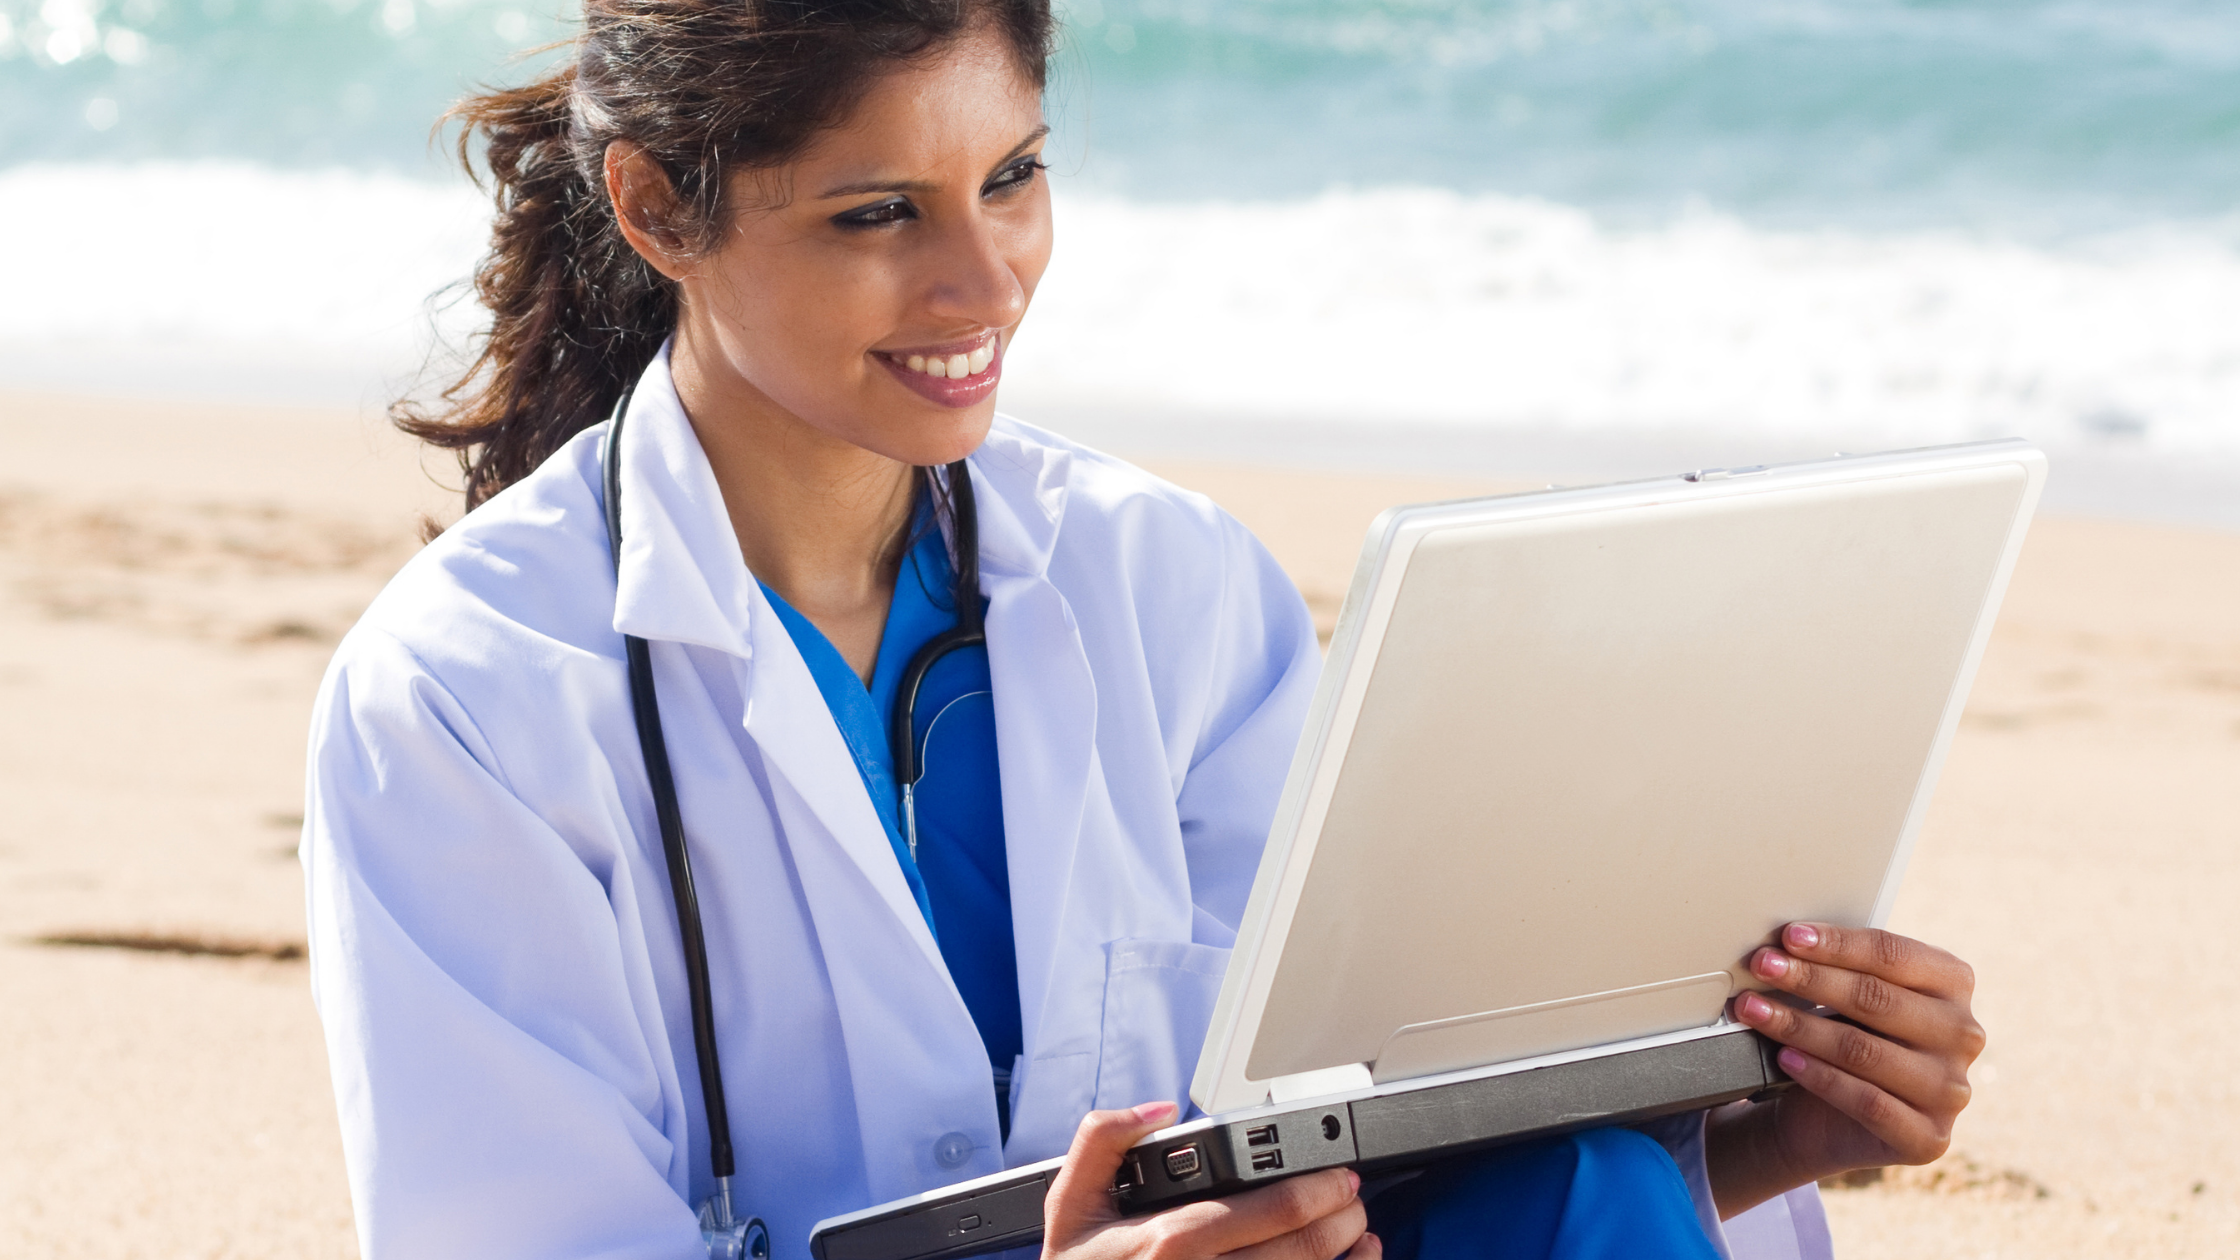 work from anywhere locations for nurses